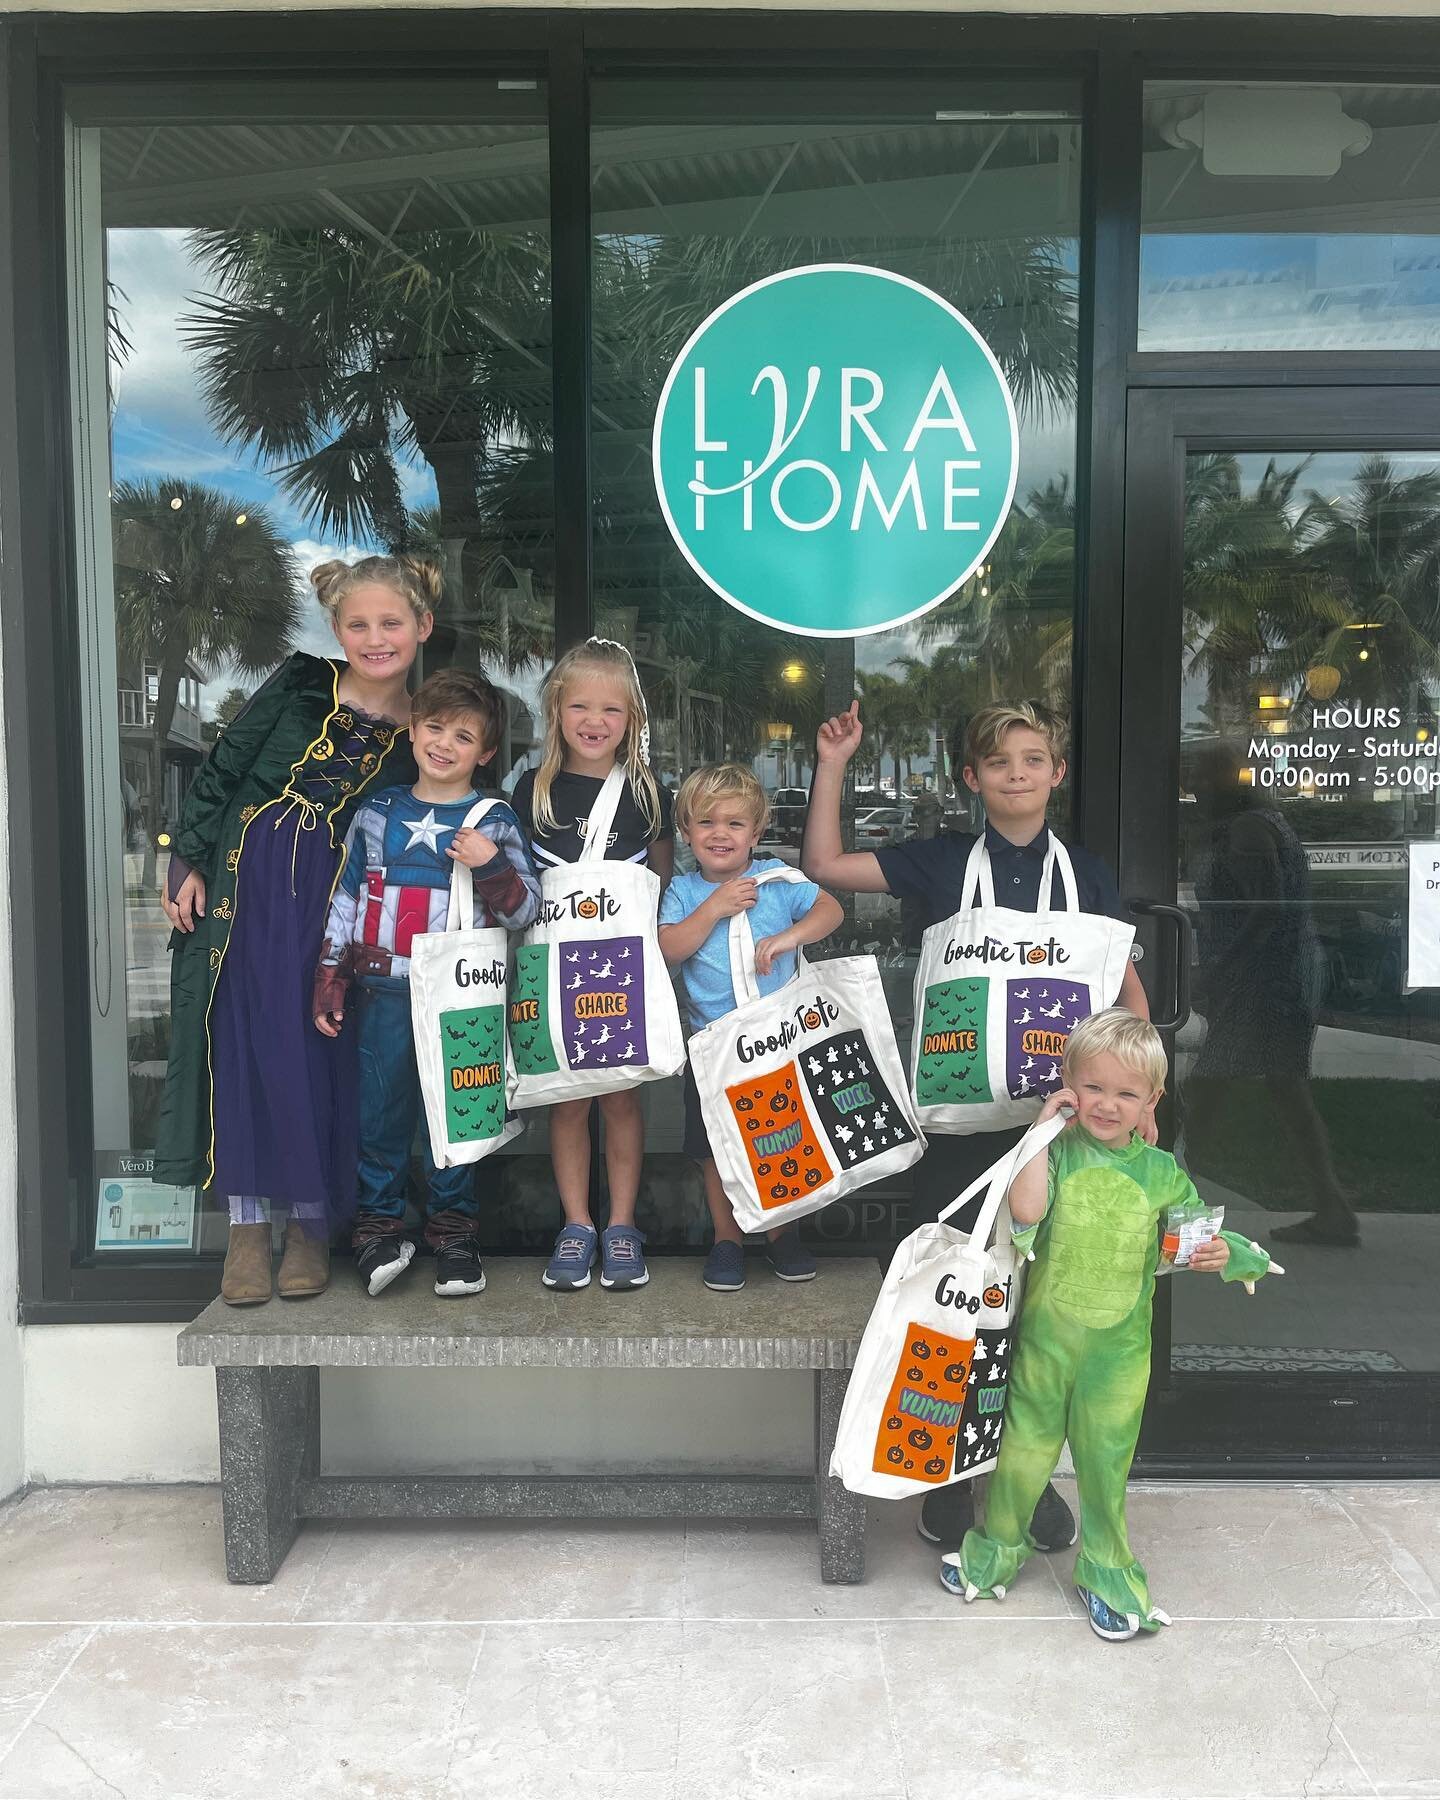 Only a few tricks, but lots of treats at Lyra Home this Halloween. Stop in and find some goodies for your favorite people!